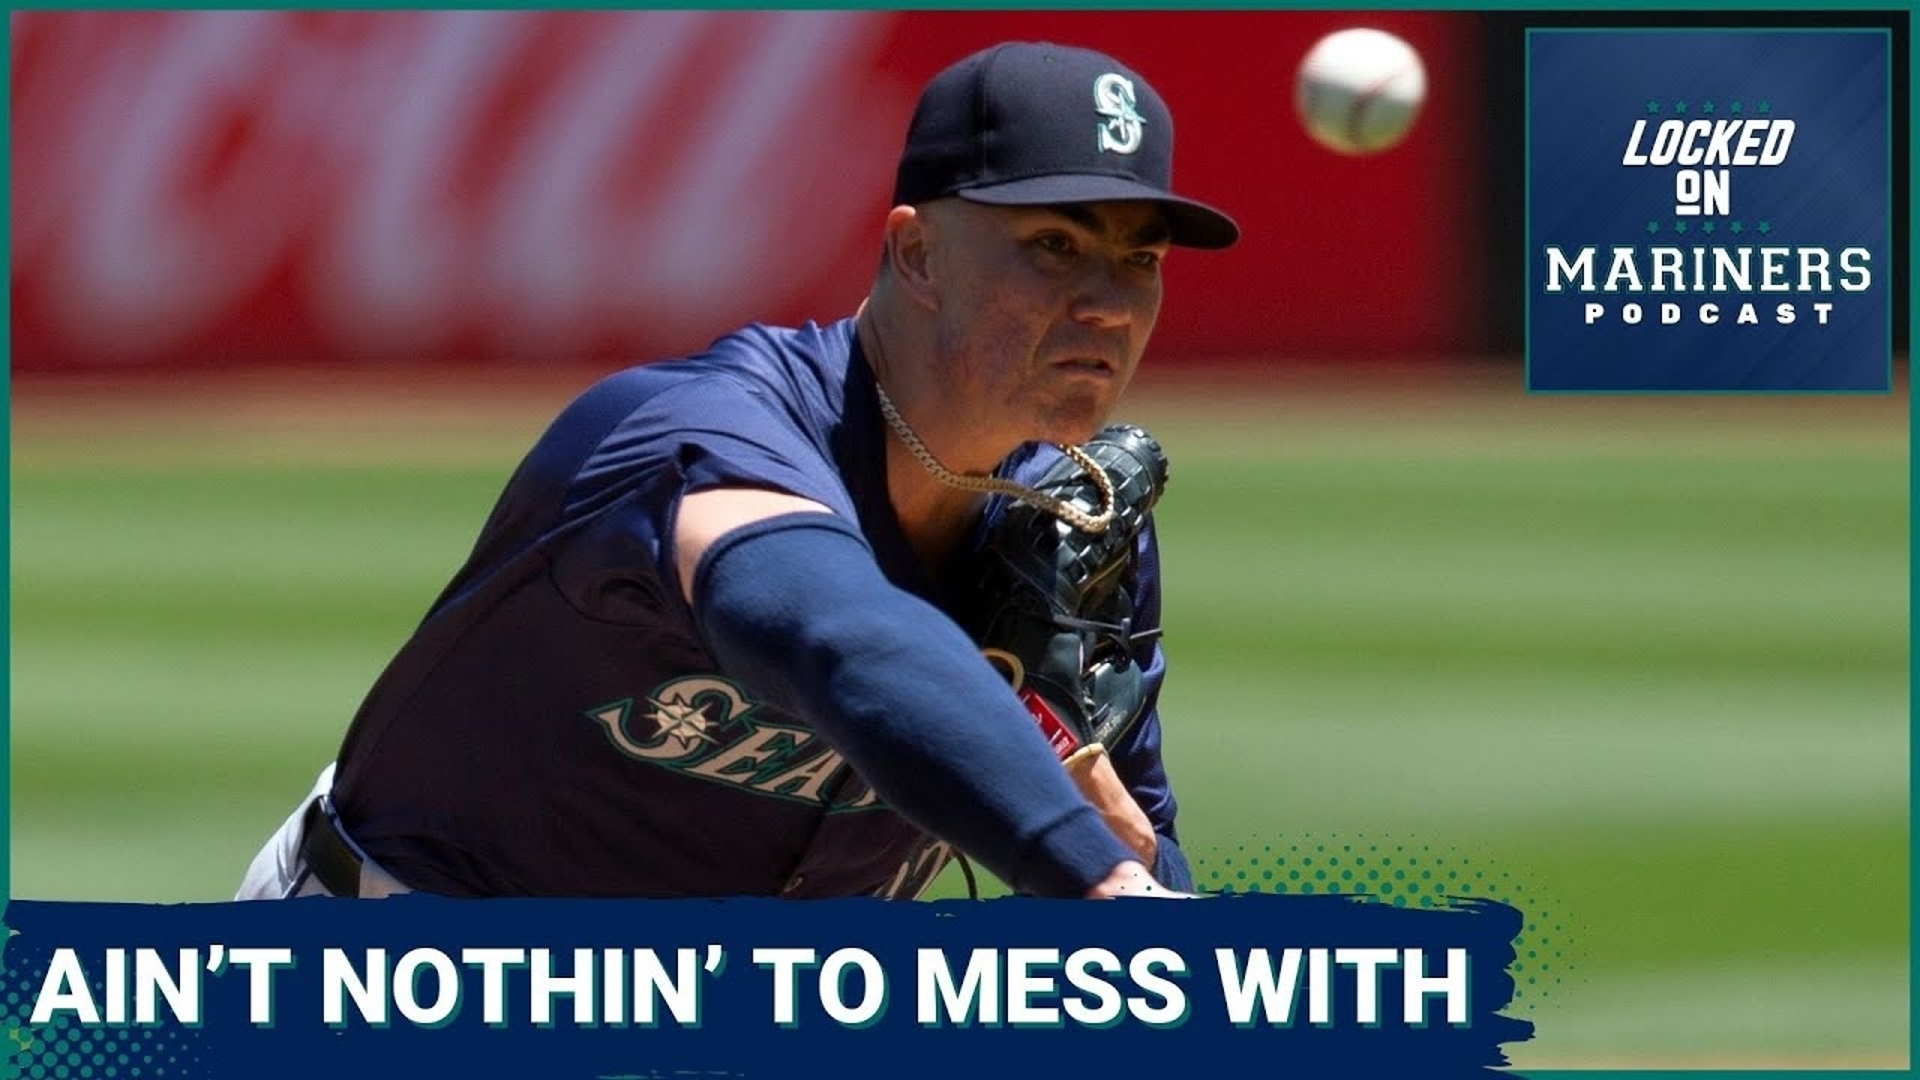 With six scoreless innings of two-hit ball, Bryan Woo continued his red-hot start to the year as the Mariners went on to shut out the Athletics, 3-0, on Thursday.